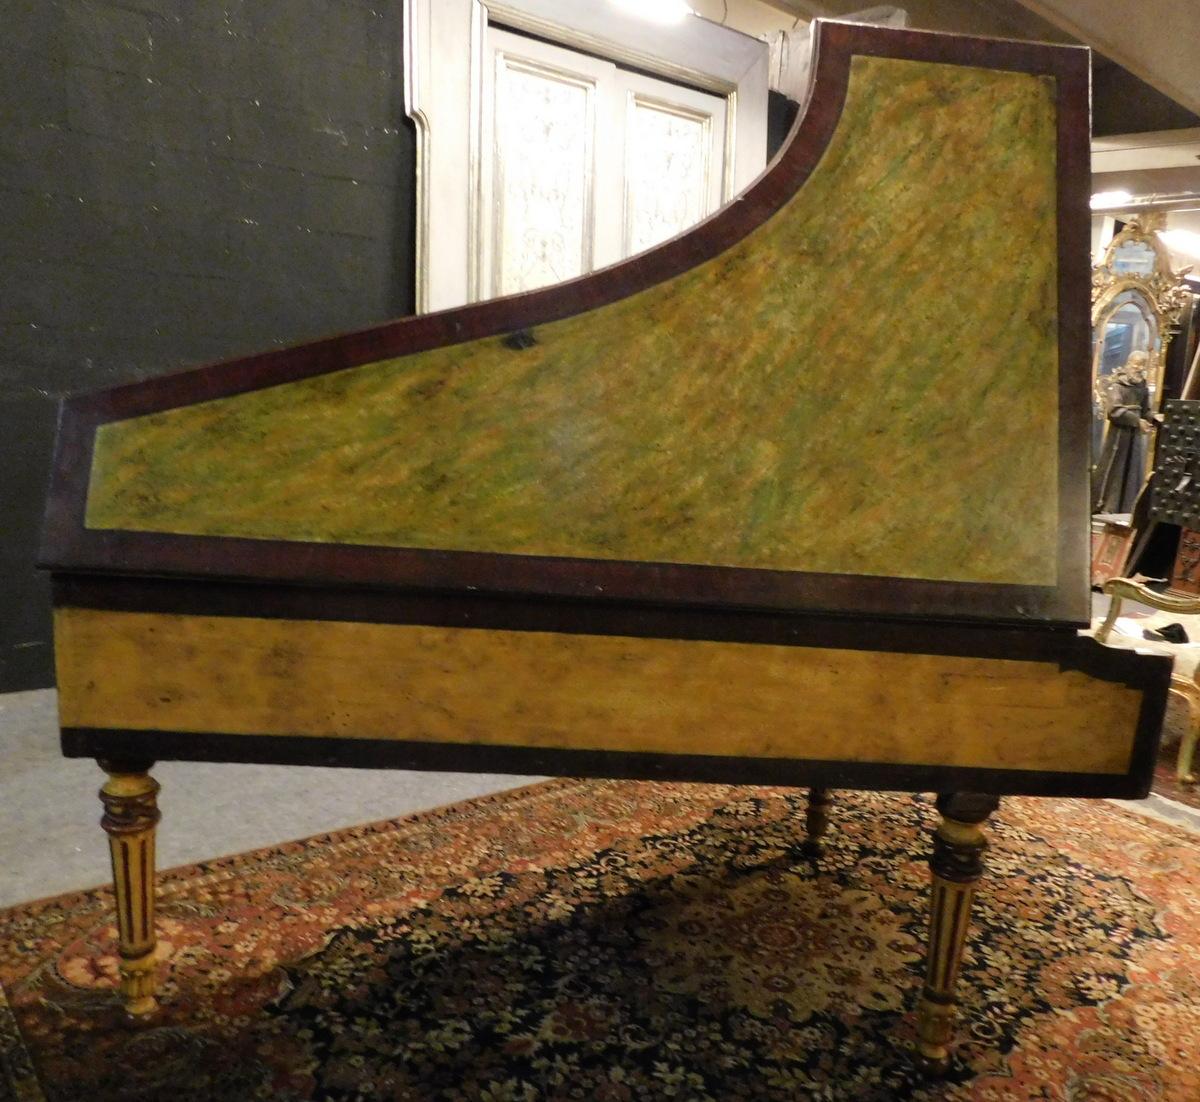 Antique Spinetta Piano, Openable with Painting, 18th Century Venice 'Italy' 2